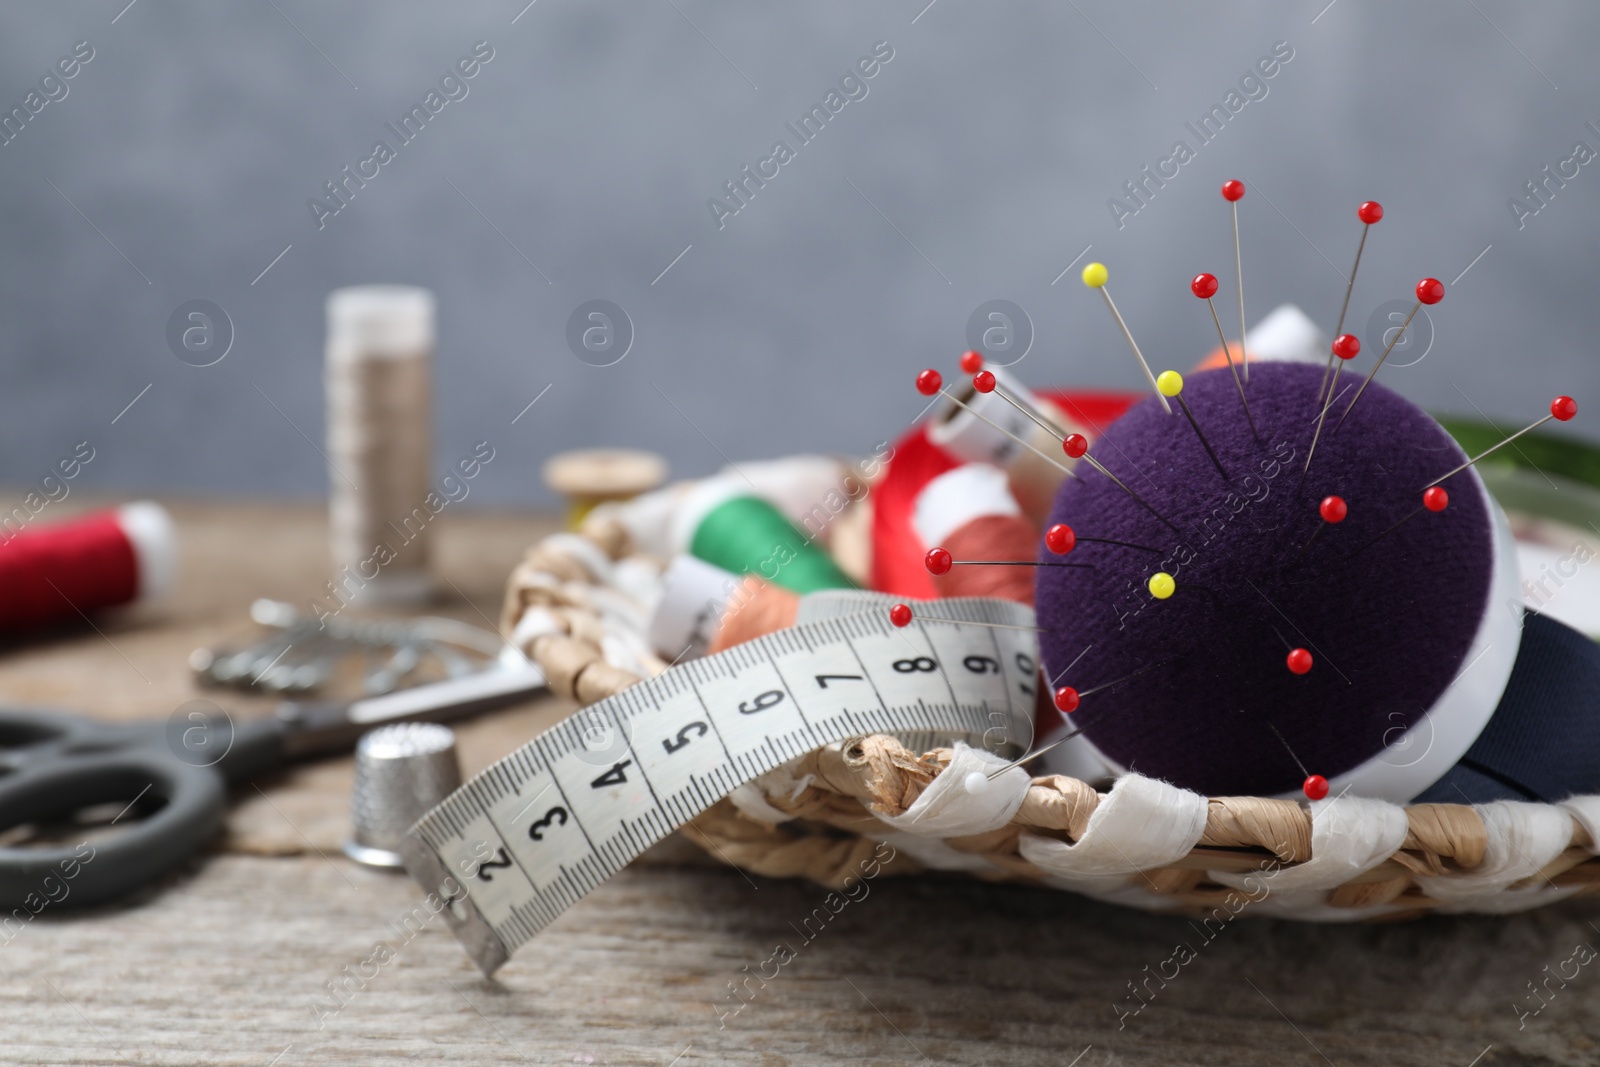 Photo of Blue pincushion with pins and other sewing tools on wooden table